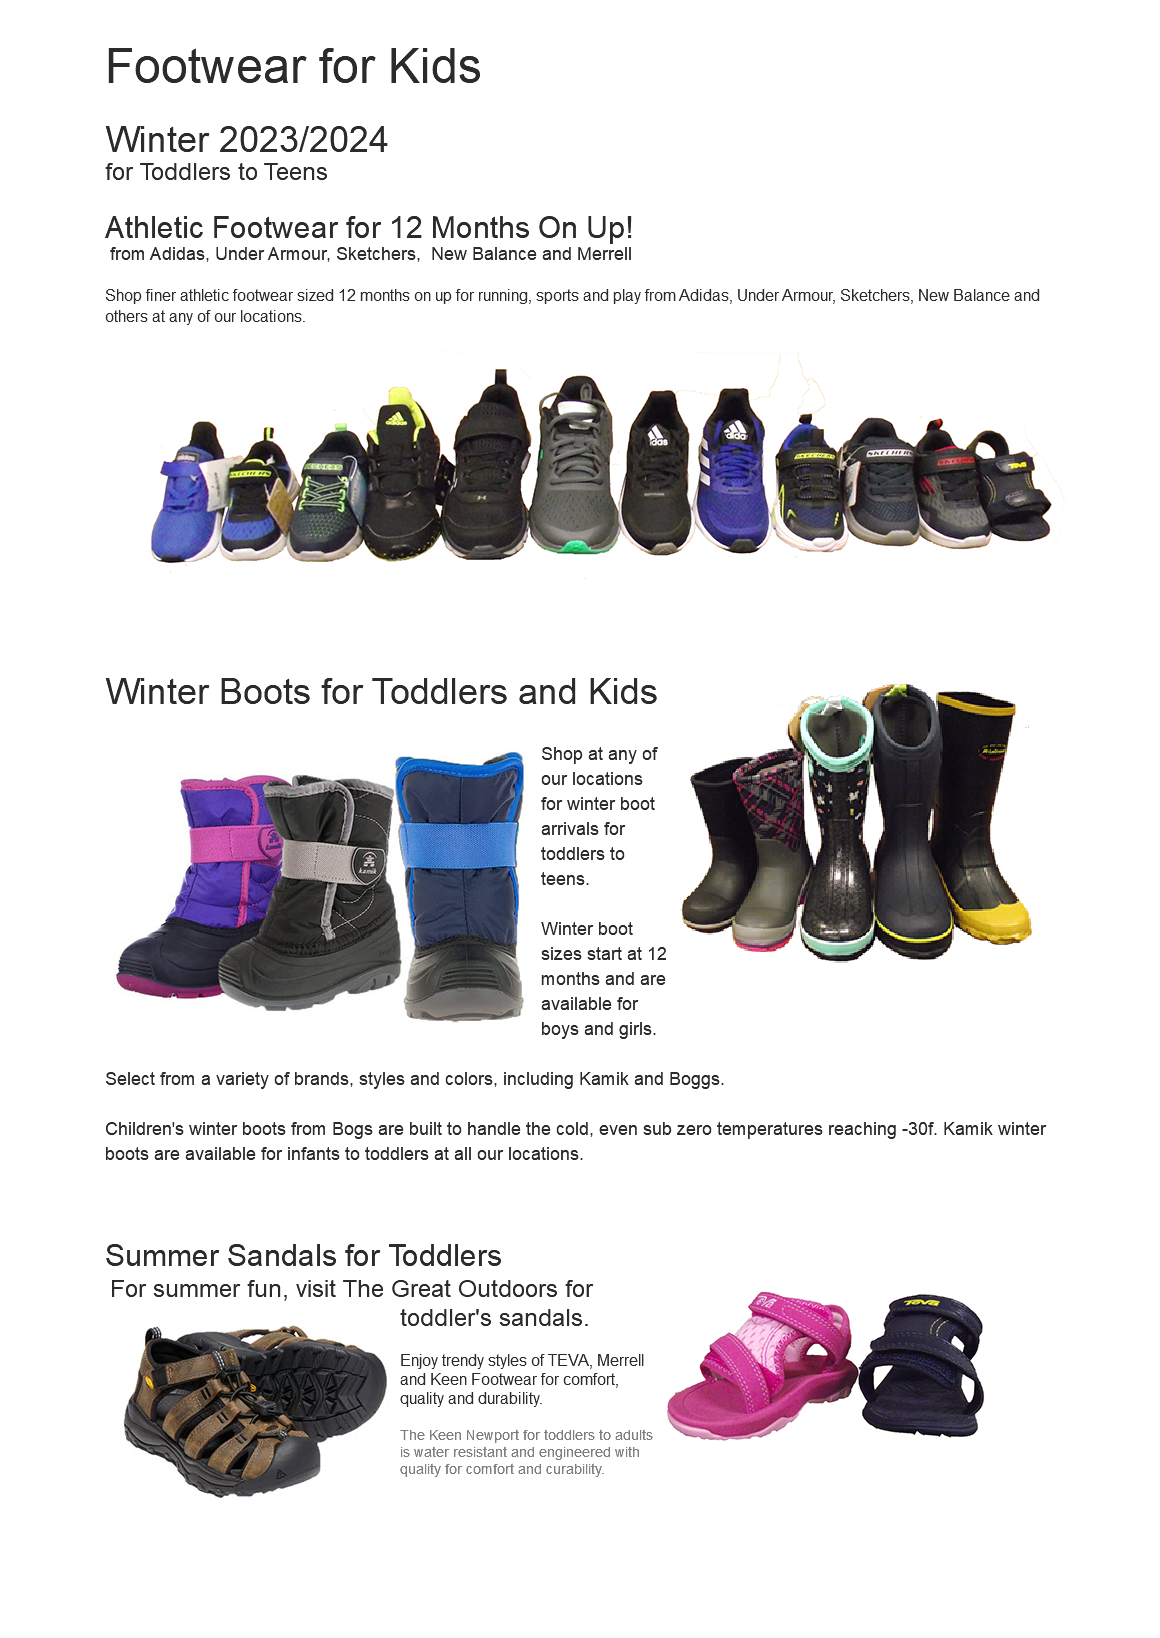  Footwear for Kids Winter 2023/2024 for Toddlers to Teens Athletic Footwear for 12 Months On Up! from Adidas, Under Armour, Sketchers, New Balance and Merrell Shop finer athletic footwear sized 12 months on up for running, sports and play from Adidas, Under Armour, Sketchers, New Balance and others at any of our locations. ﷯ Winter Boots for Toddlers and Kids﷯ ﷯Shop at any of our locations for winter boot arrivals for toddlers to teens. Winter boot sizes start at 12 months and are available for boys and girls. Select from a variety of brands, styles and colors, including Kamik and Boggs. Children's winter boots from Bogs are built to handle the cold, even sub zero temperatures reaching -30f. Kamik winter boots are available for infants to toddlers at all our locations. Summer Sandals for Toddlers ﷯For summer fun, visit The Great Outdoors for toddler's﷯ sandals. Enjoy trendy styles of TEVA, Merrell and Keen Footwear for comfort, quality and durability. The Keen Newport for toddlers to adults is water resistant and engineered with quality for comfort and curability. 